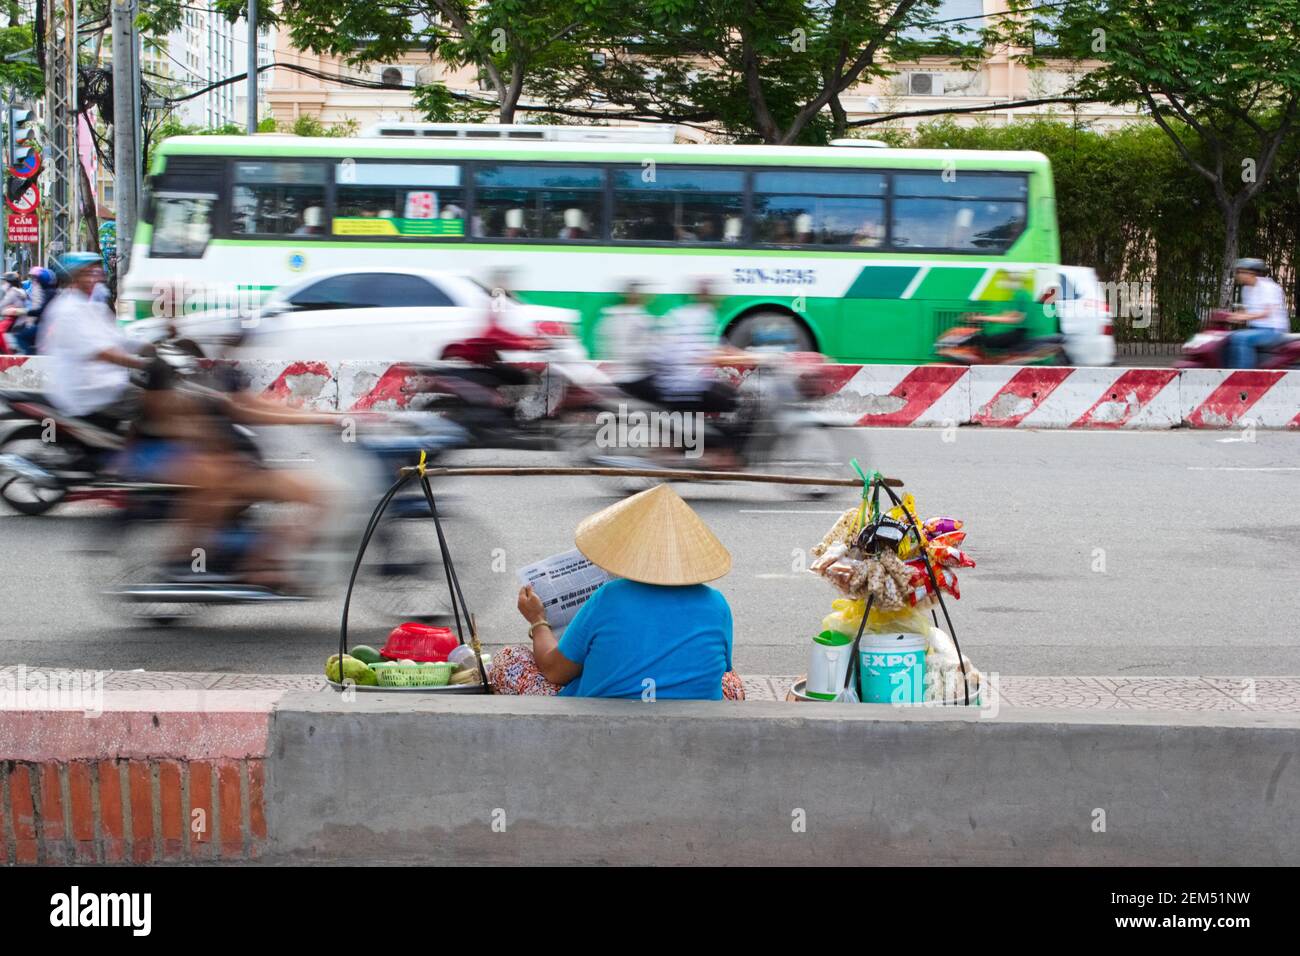 July, 2015 - Ho Chi Minh, Vietnam: Vietnamese woman selling street food along the road with driving traffic in motion. Stock Photo